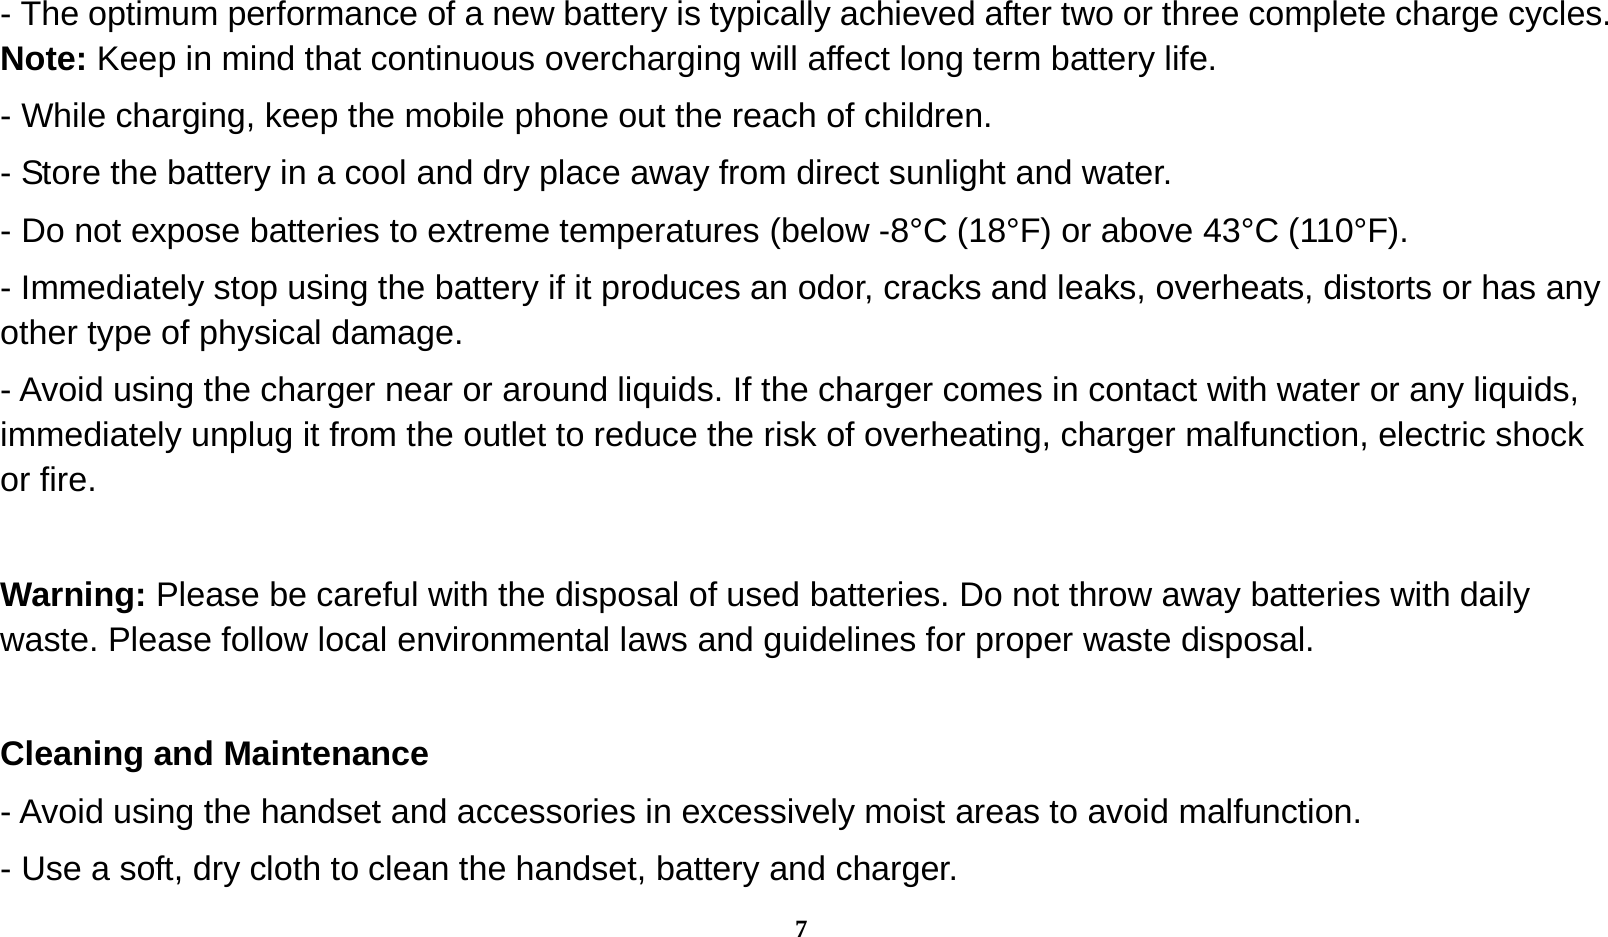  7 - The optimum performance of a new battery is typically achieved after two or three complete charge cycles. Note: Keep in mind that continuous overcharging will affect long term battery life. - While charging, keep the mobile phone out the reach of children. - Store the battery in a cool and dry place away from direct sunlight and water. - Do not expose batteries to extreme temperatures (below -8°C (18°F) or above 43°C (110°F). - Immediately stop using the battery if it produces an odor, cracks and leaks, overheats, distorts or has any other type of physical damage. - Avoid using the charger near or around liquids. If the charger comes in contact with water or any liquids, immediately unplug it from the outlet to reduce the risk of overheating, charger malfunction, electric shock or fire.  Warning: Please be careful with the disposal of used batteries. Do not throw away batteries with daily waste. Please follow local environmental laws and guidelines for proper waste disposal.  Cleaning and Maintenance - Avoid using the handset and accessories in excessively moist areas to avoid malfunction.   - Use a soft, dry cloth to clean the handset, battery and charger. 